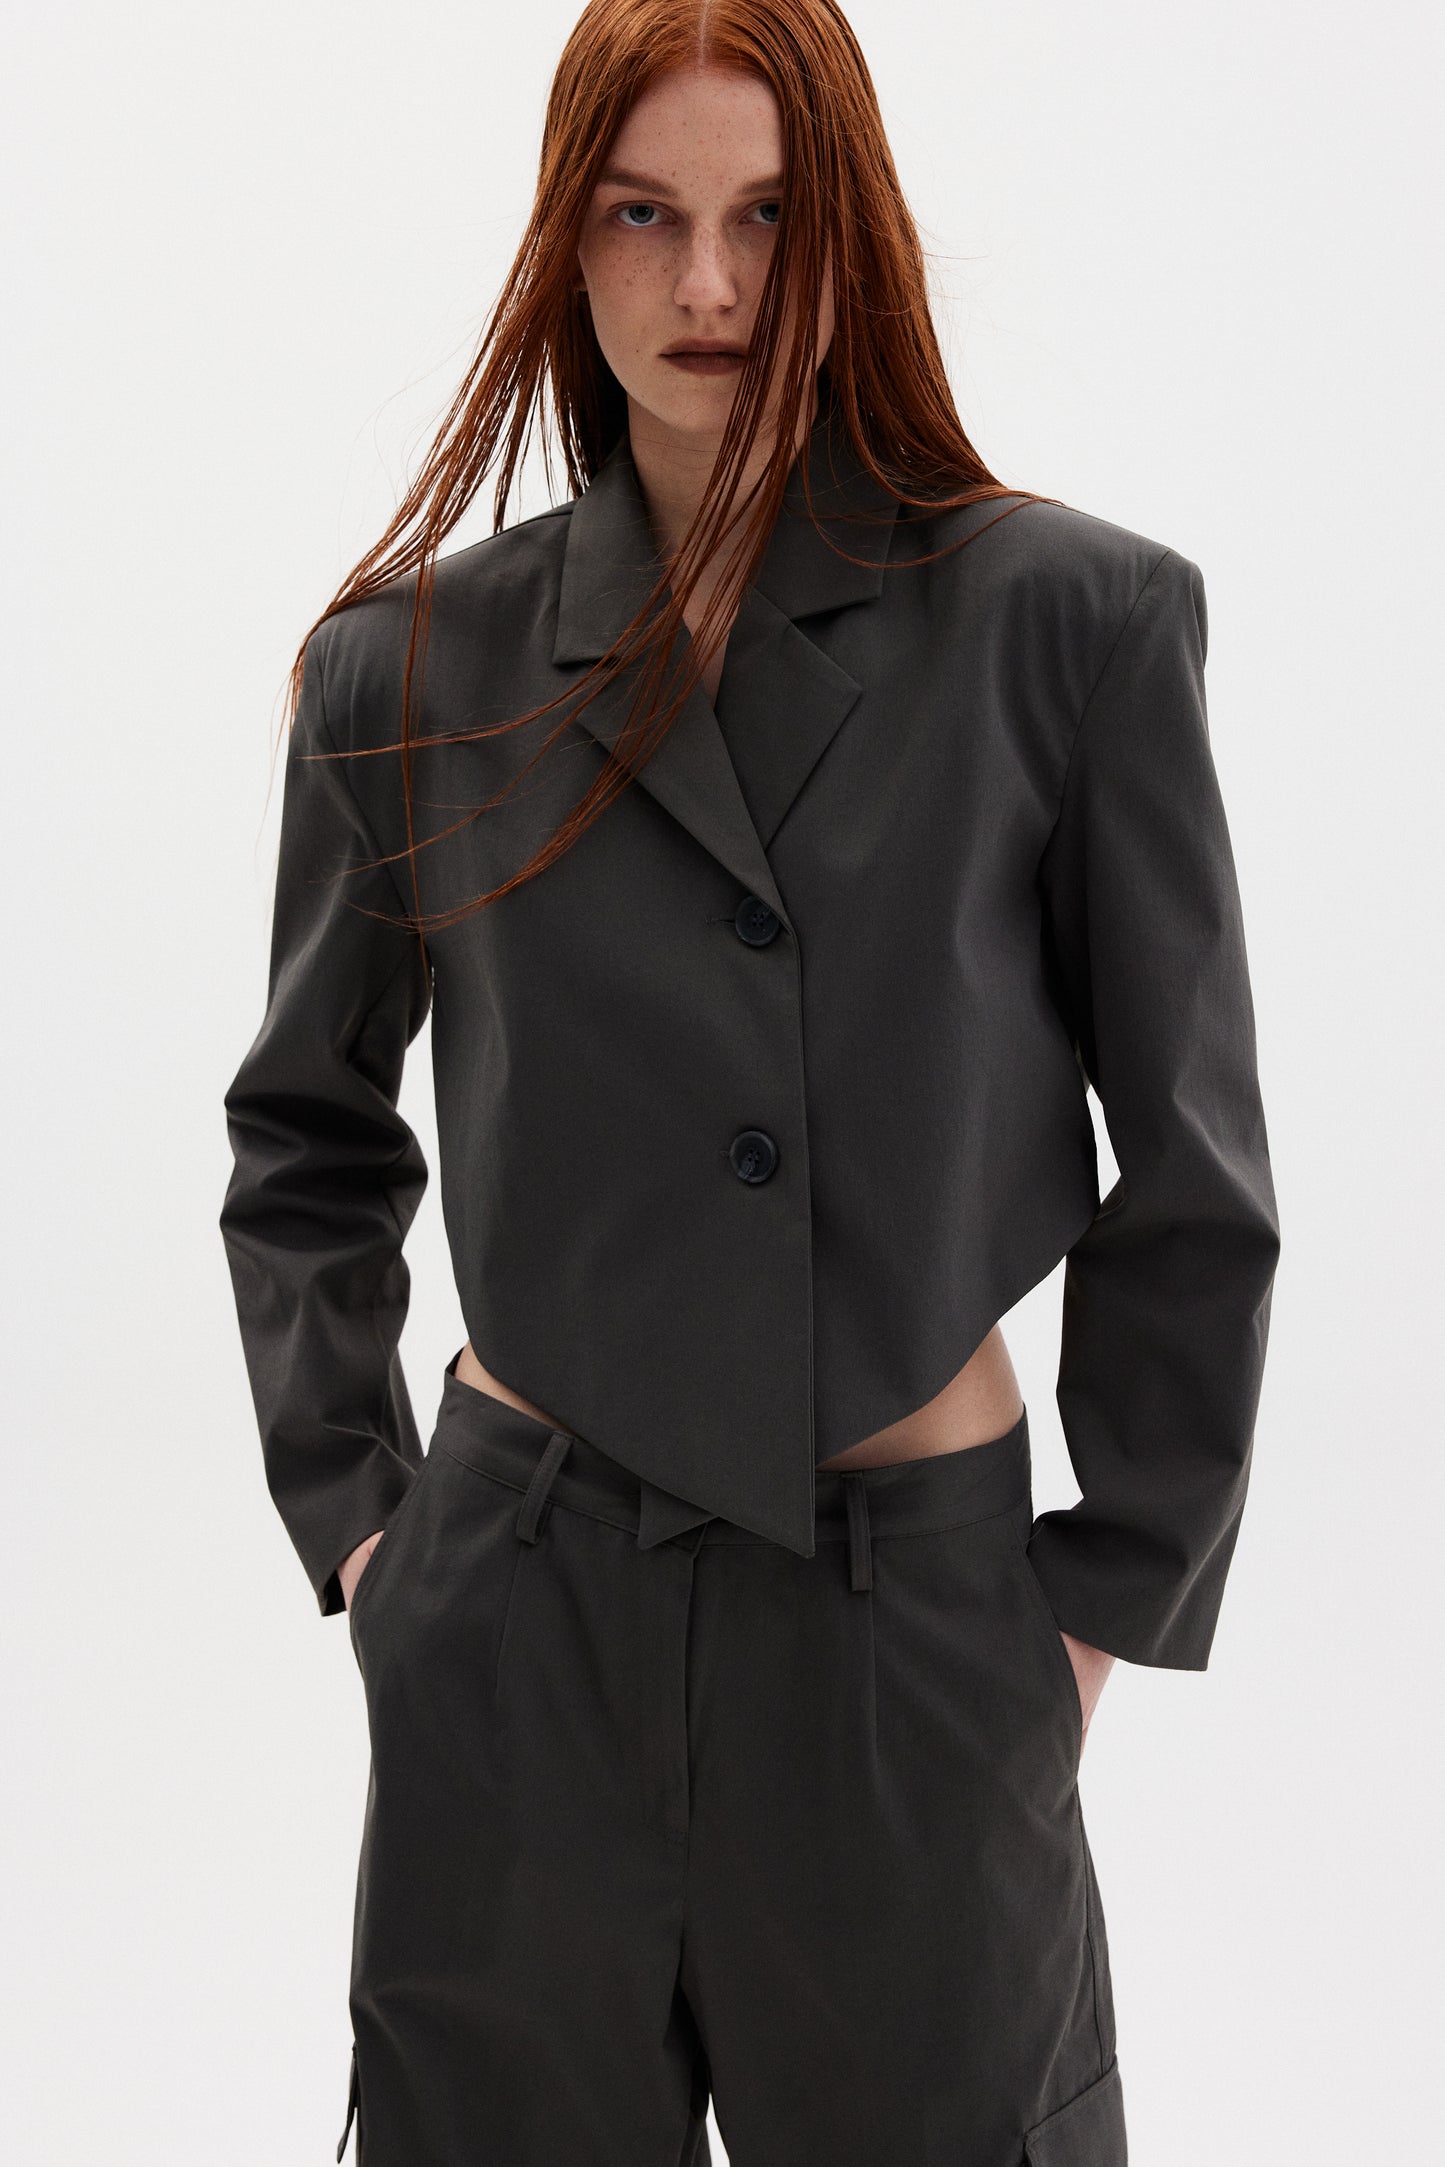 Crossover Suit Blazer, Charcoal